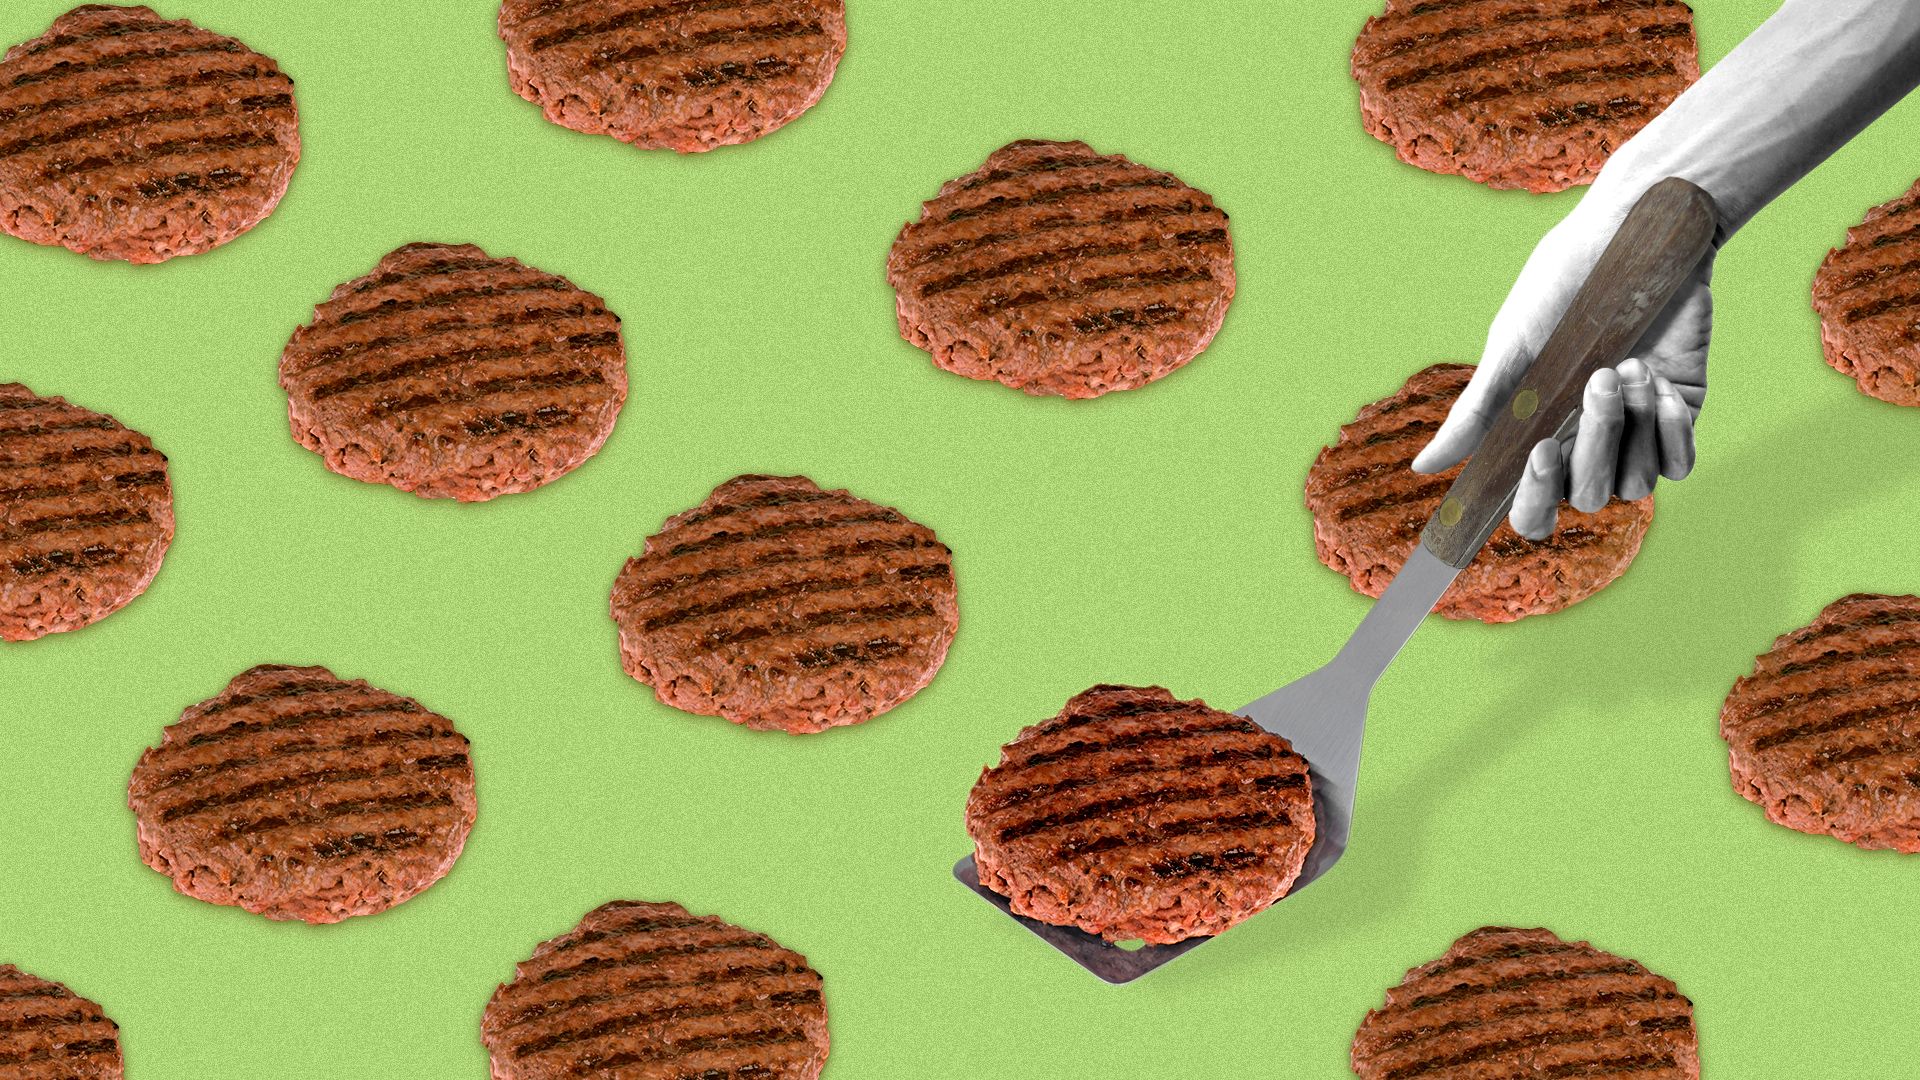 Illustration of a pattern made out of burger patties with a hand and spatula flipping one